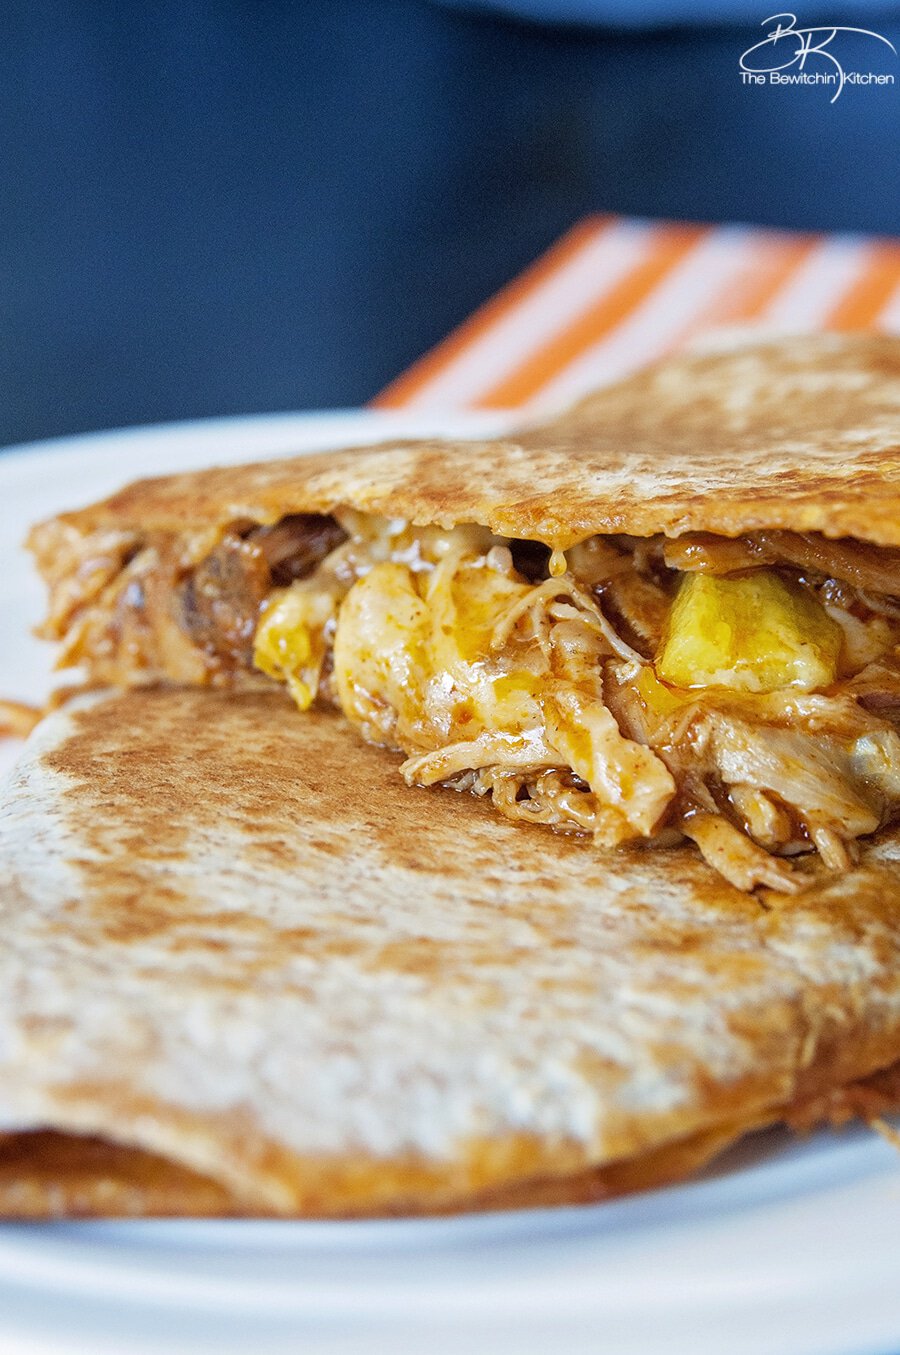 Pulled pork quesadillas. A delicious slow cooker recipe made with a mexican twist! | The Bewitchin' Kitchen